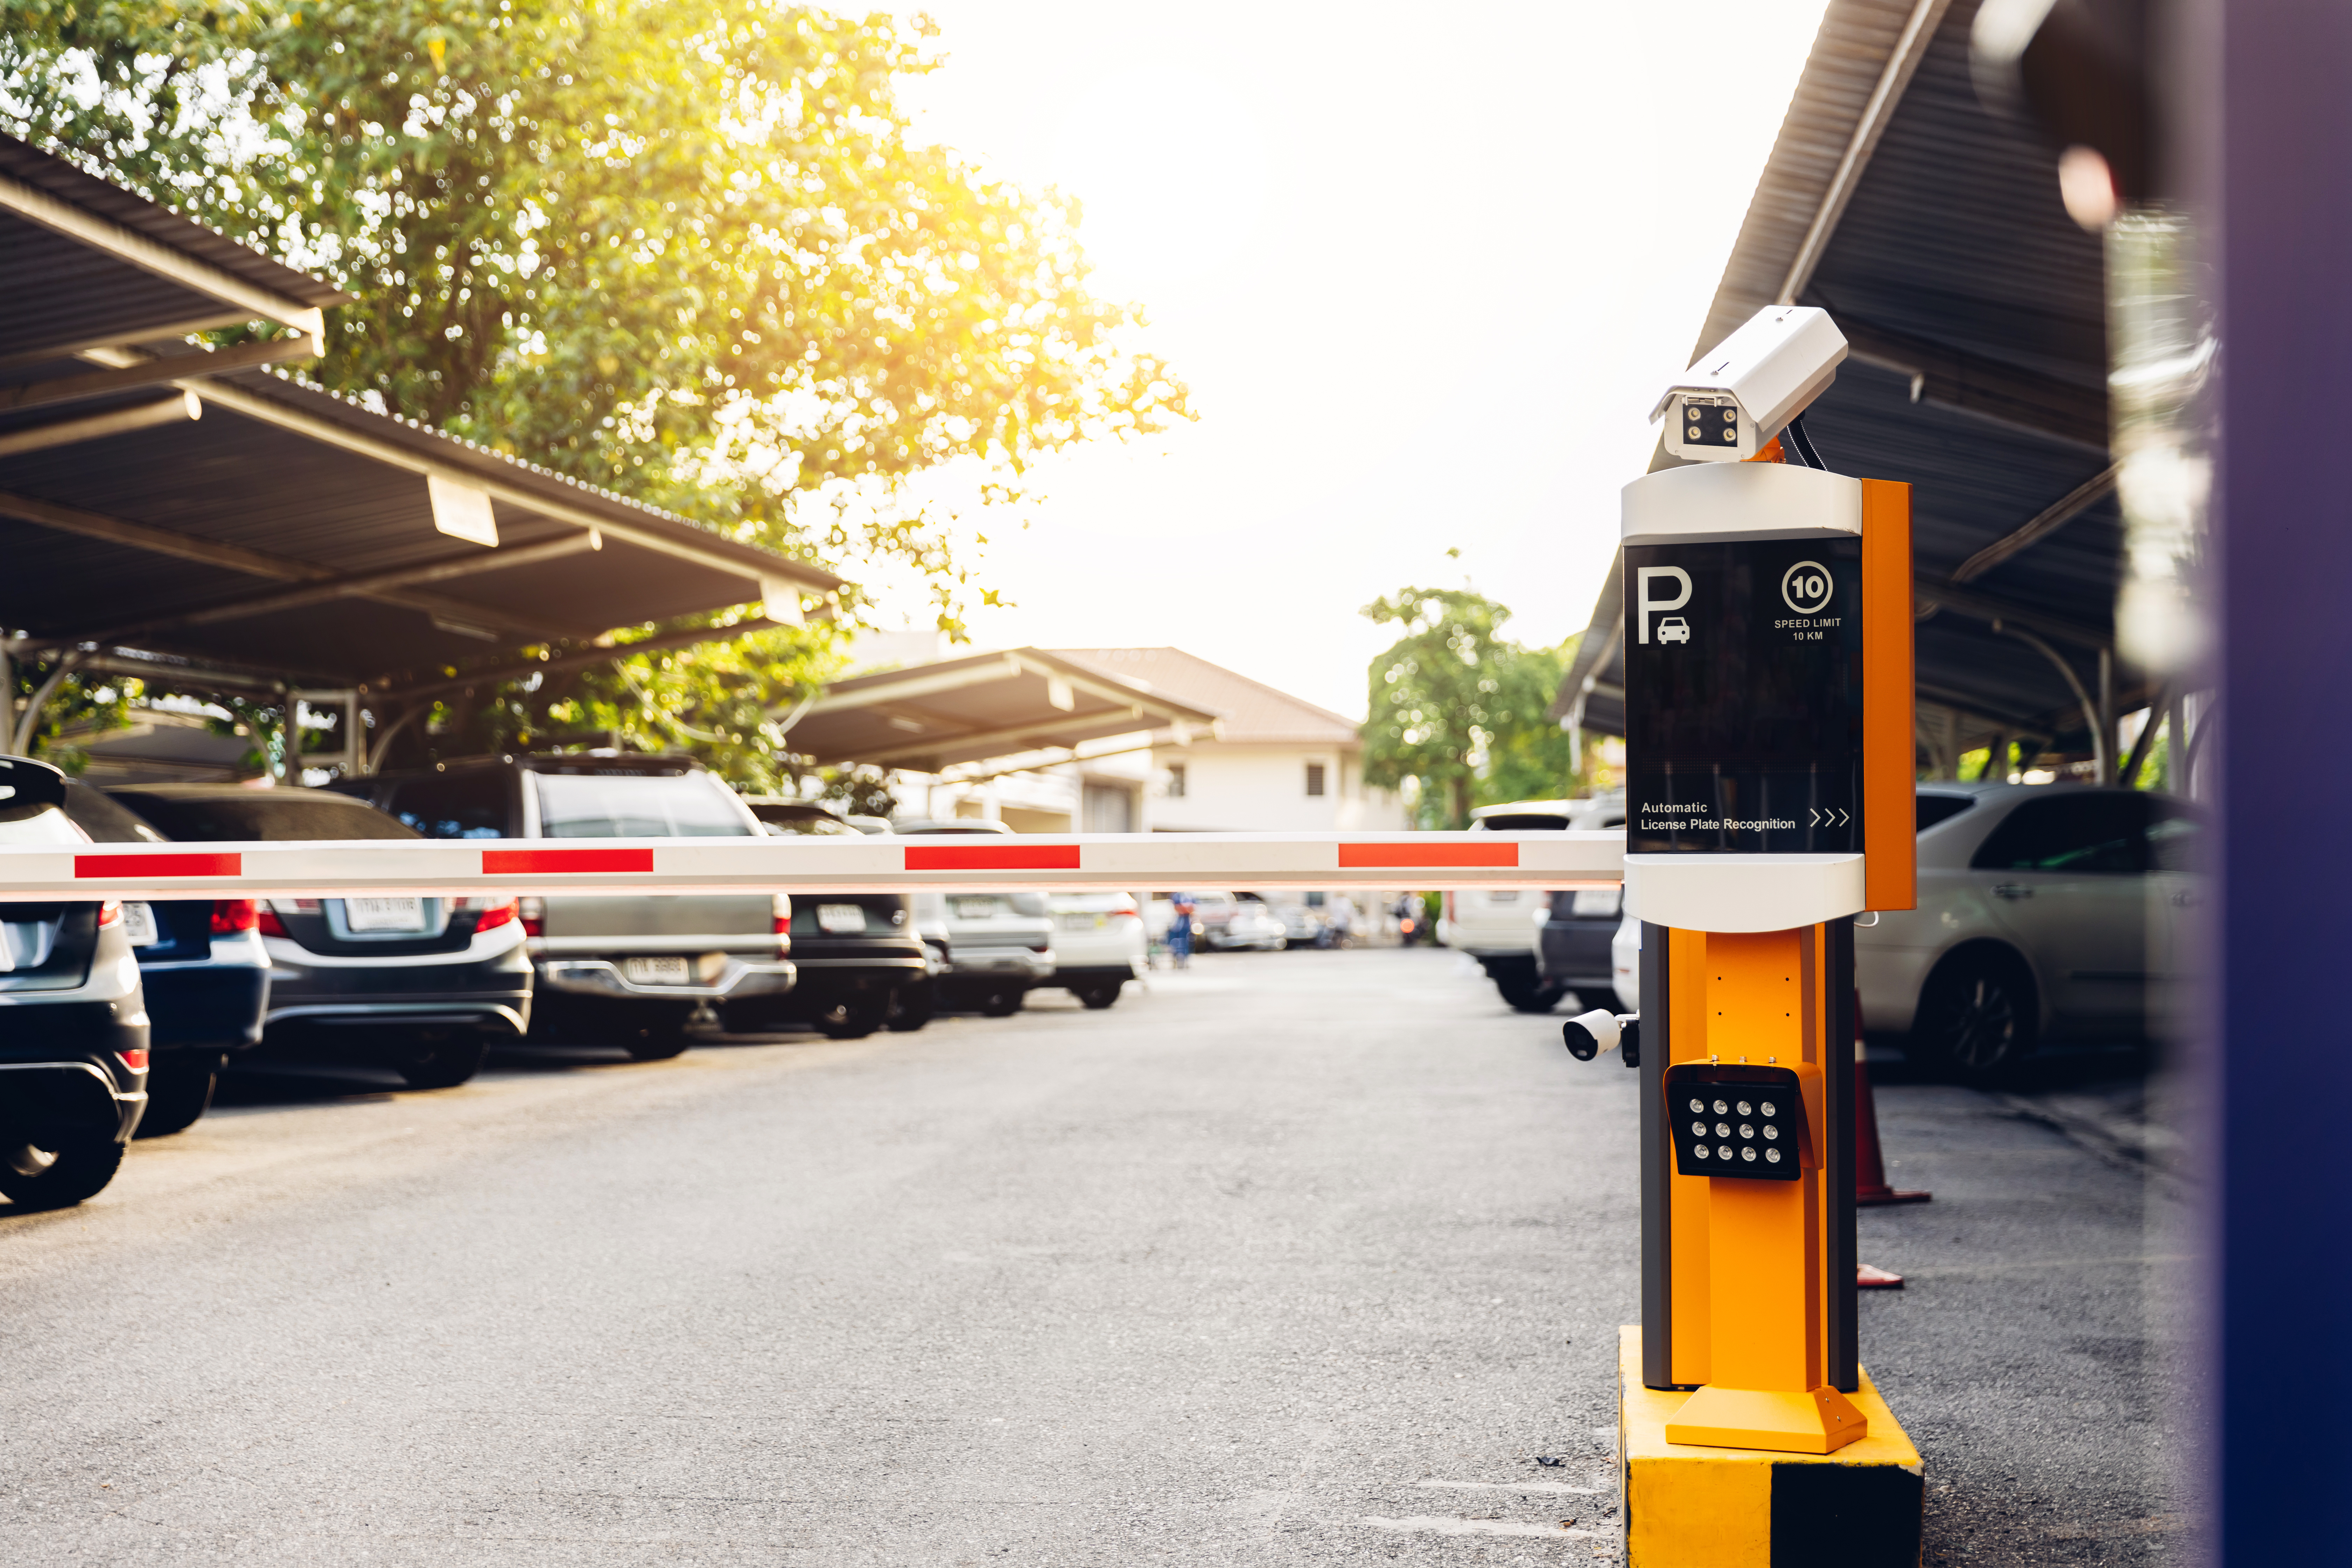 How Vehicle Credentialing and Access Control Gates Revolutionize Property Safety